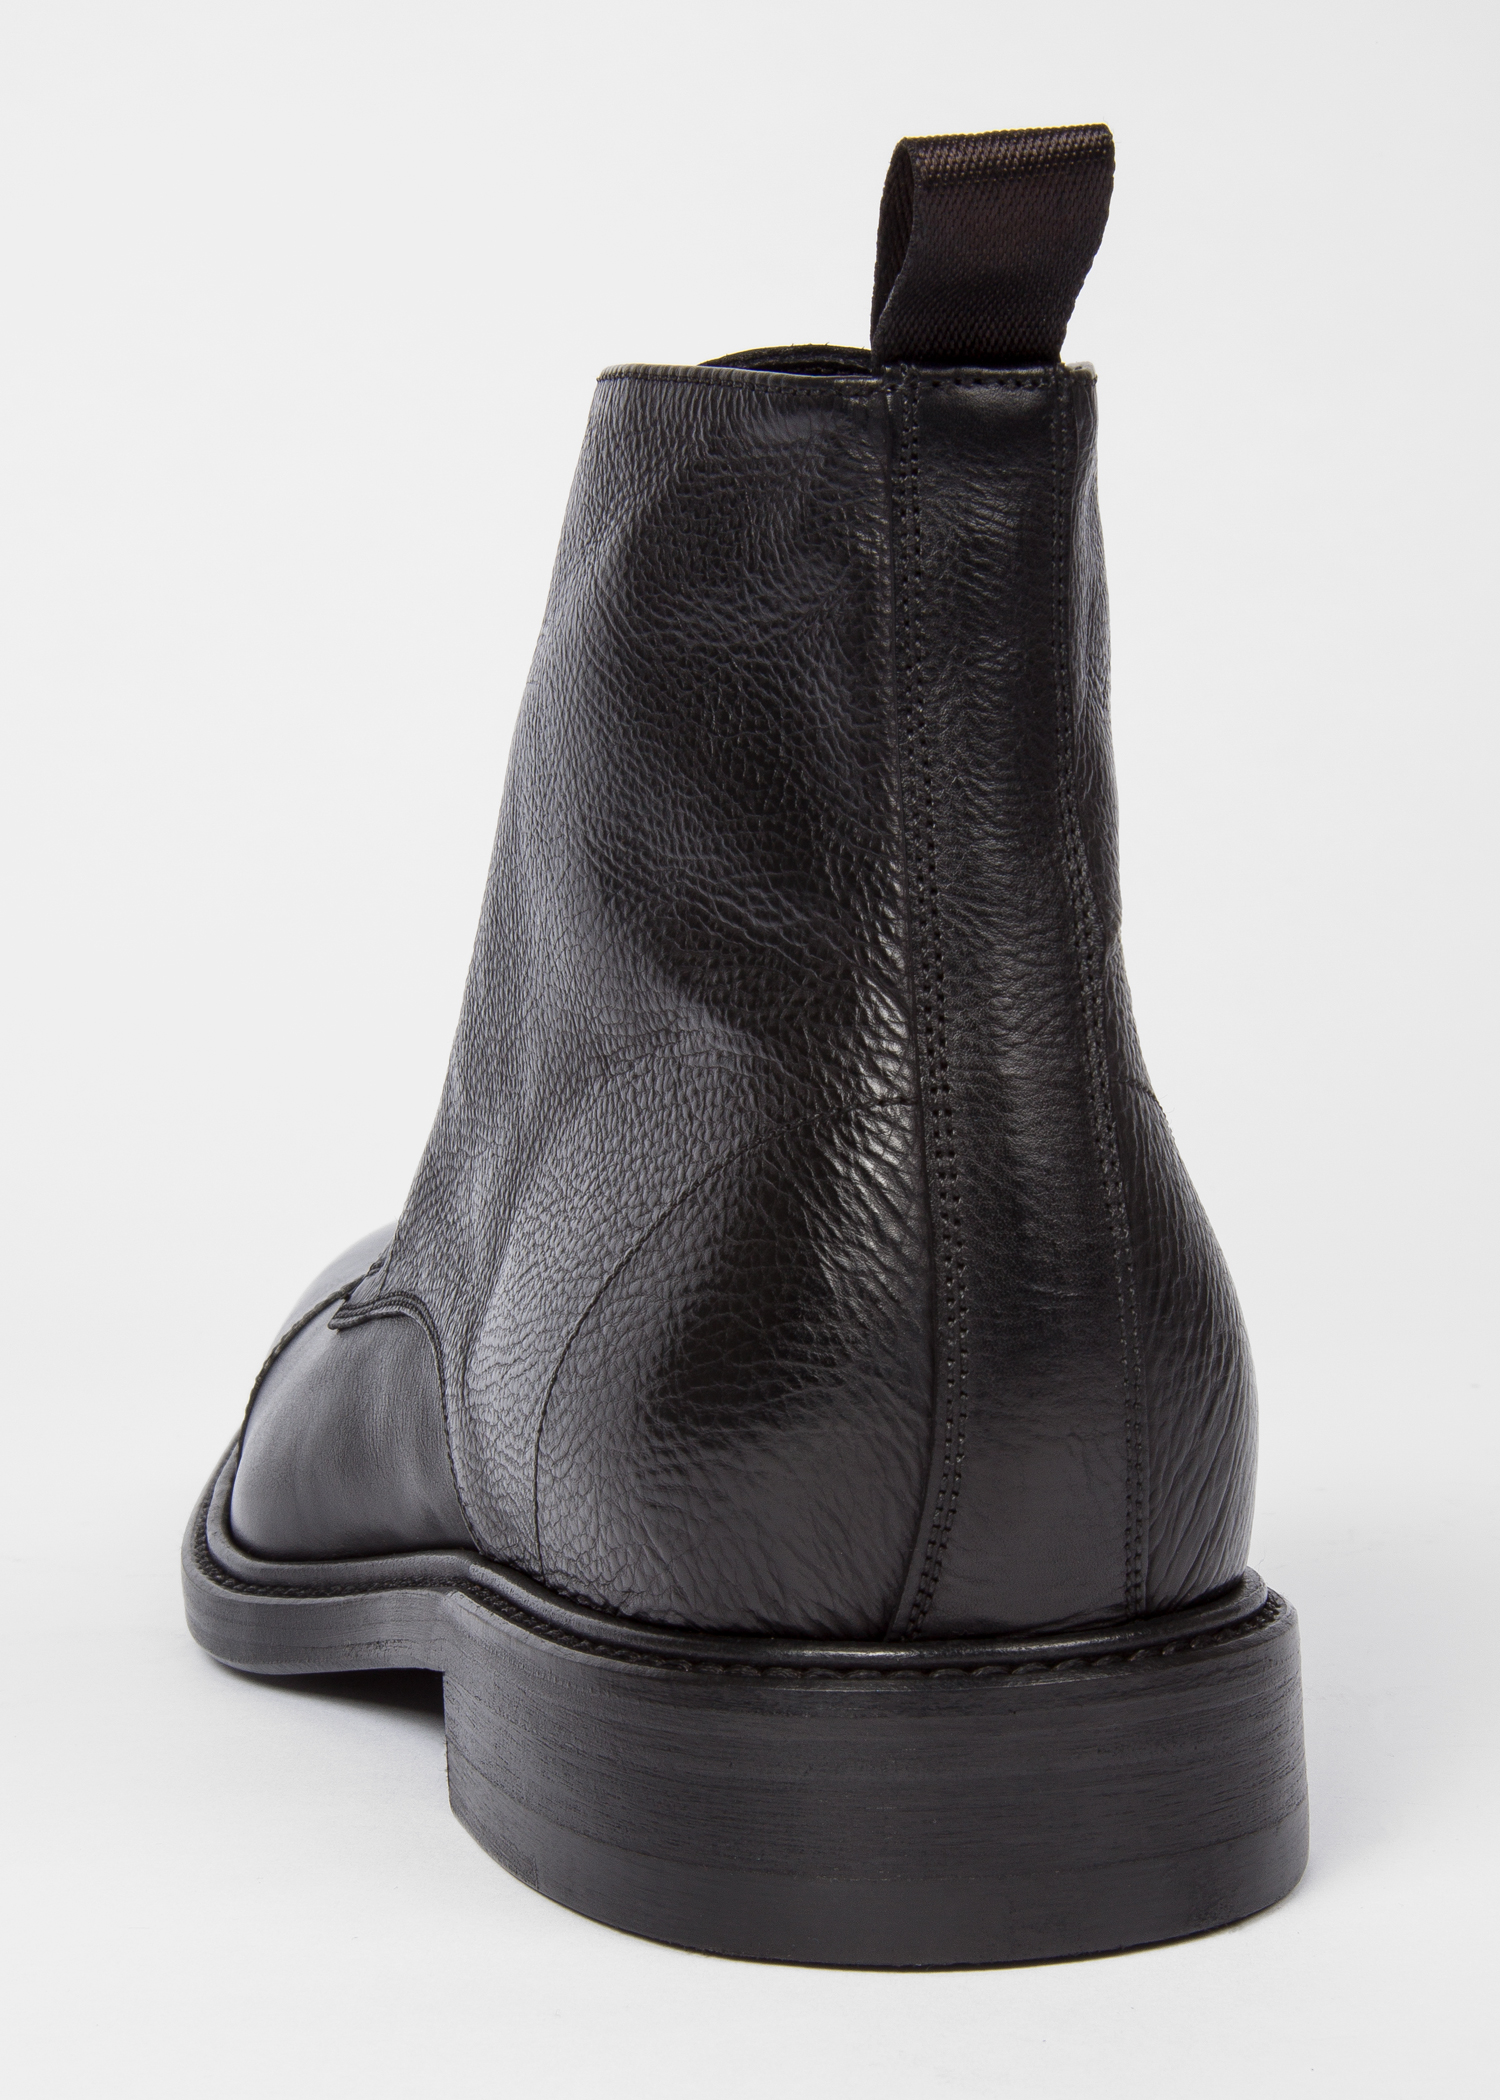 Men's Dip-Dyed Black Calf Leather 'Jarman' Boots Paul Smith